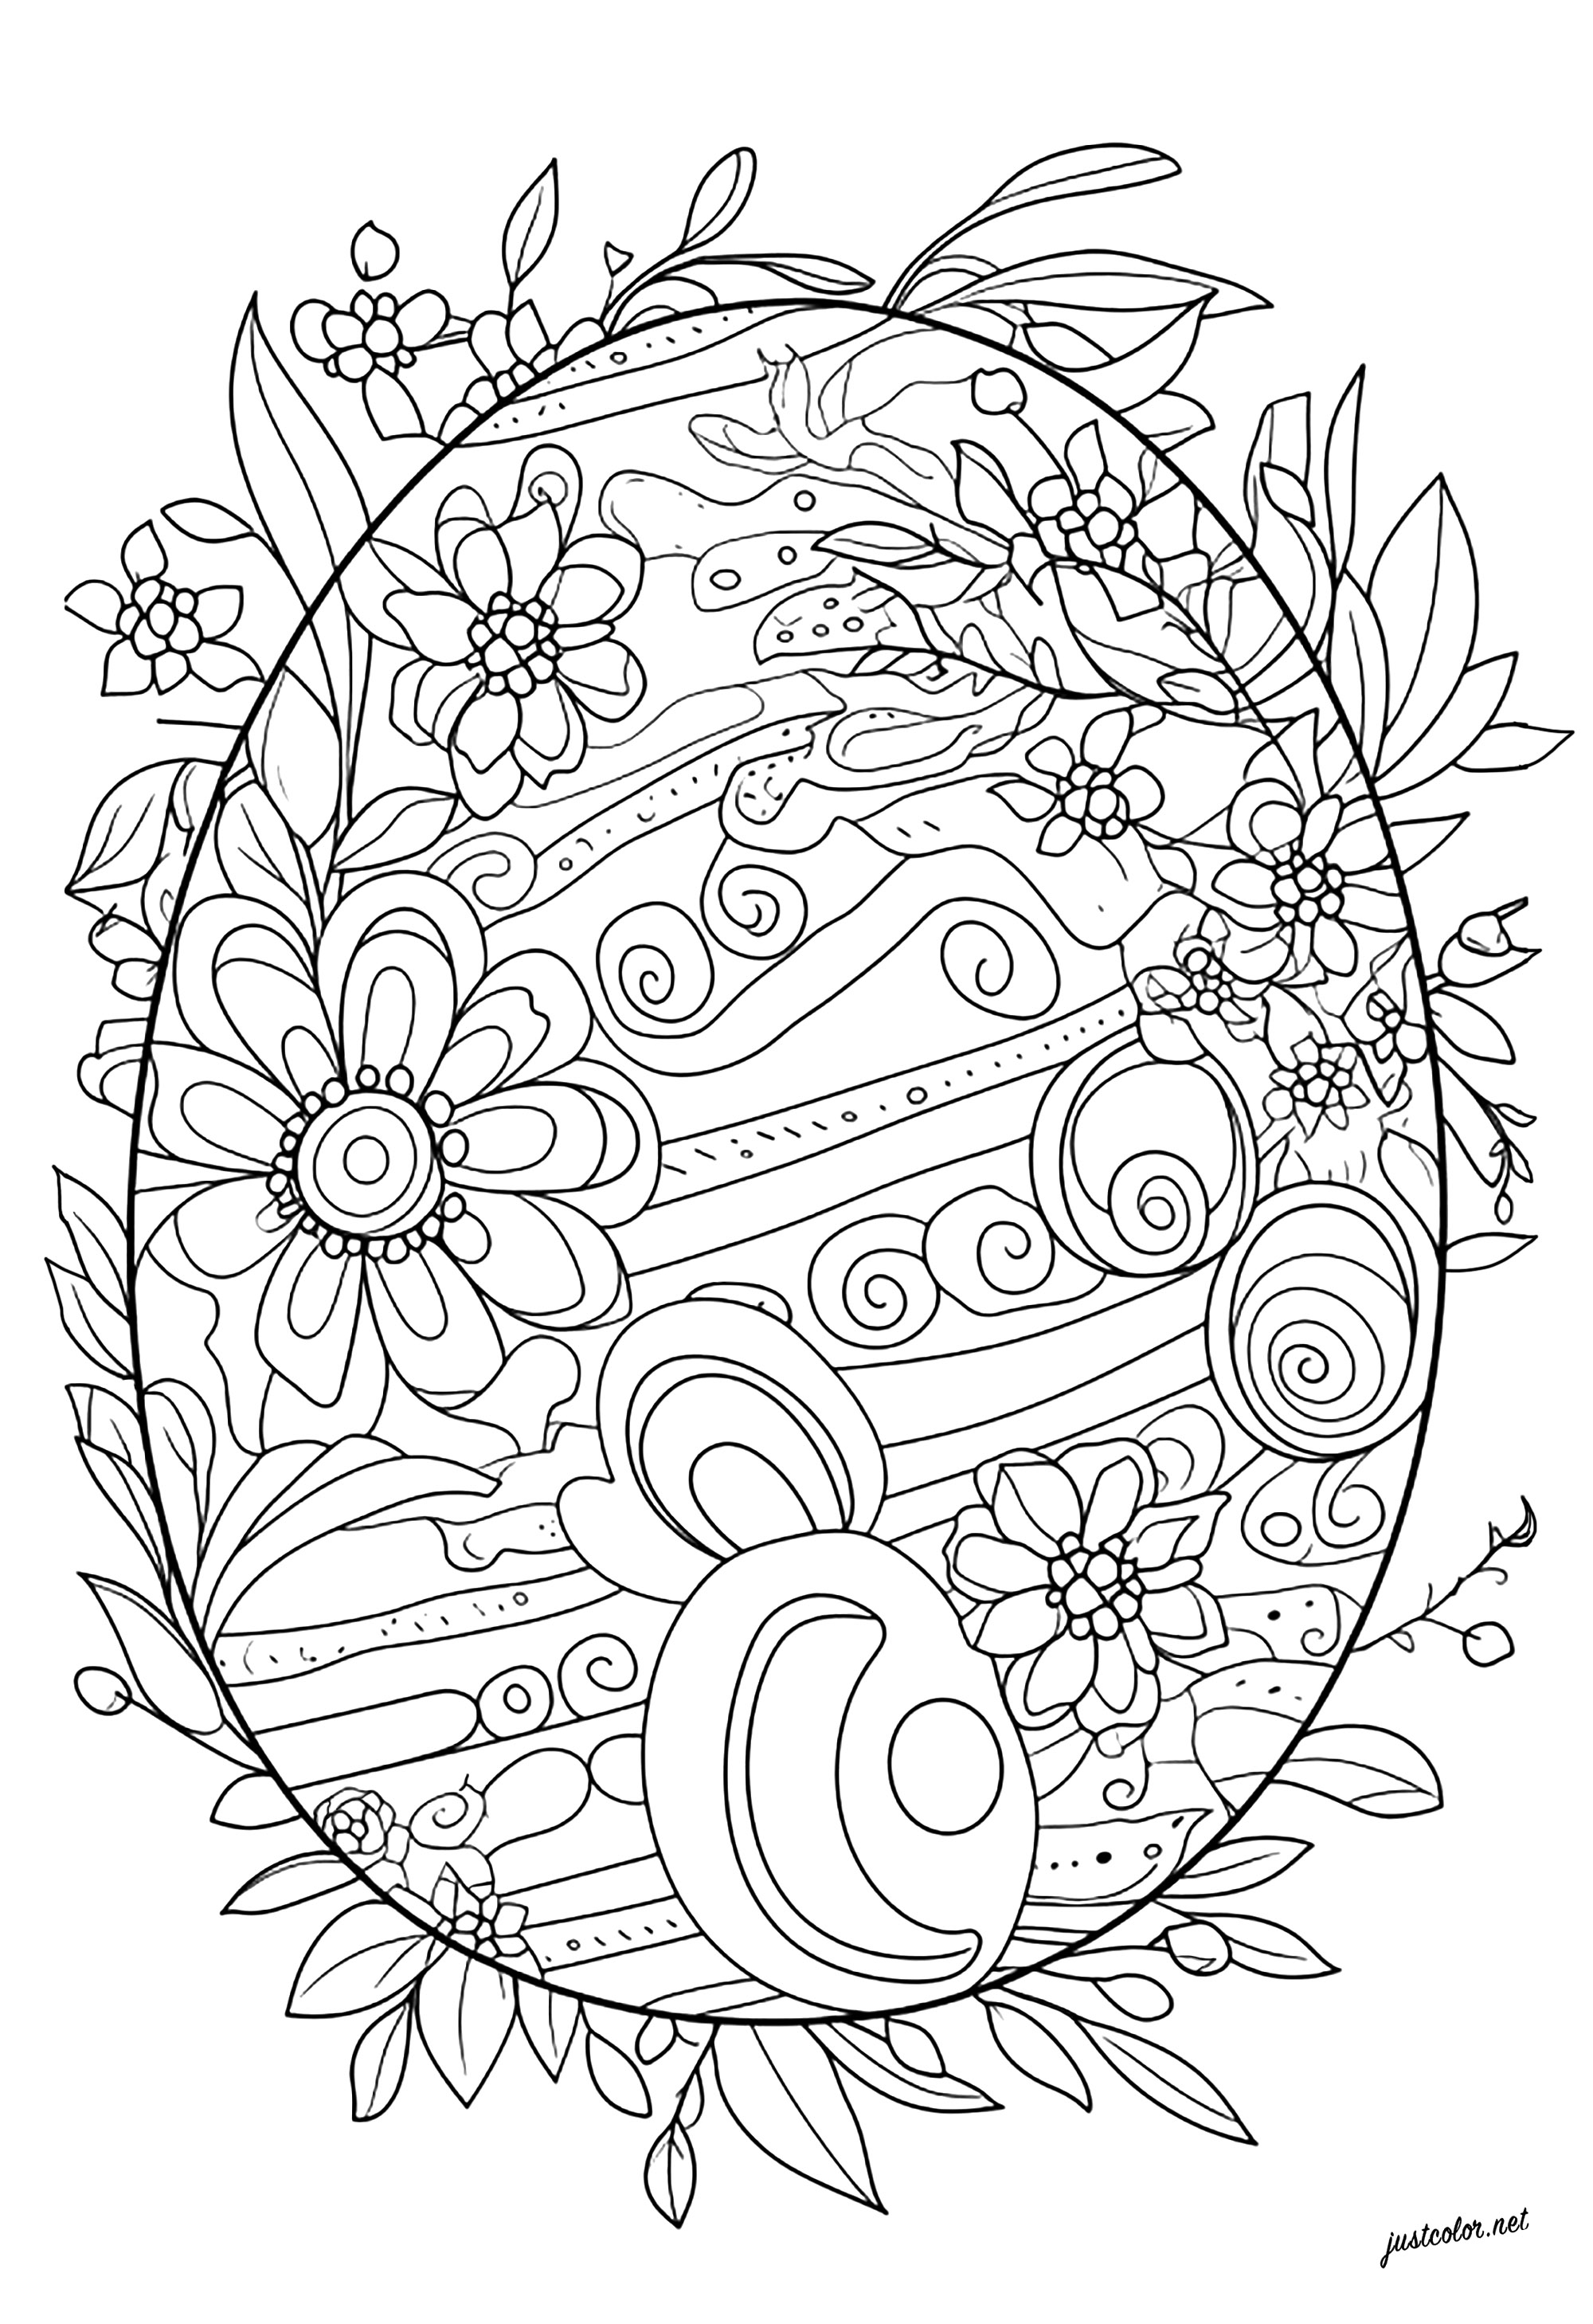 Original coloring of an Easter egg. Color the floral and abstract motifs of this Easter egg